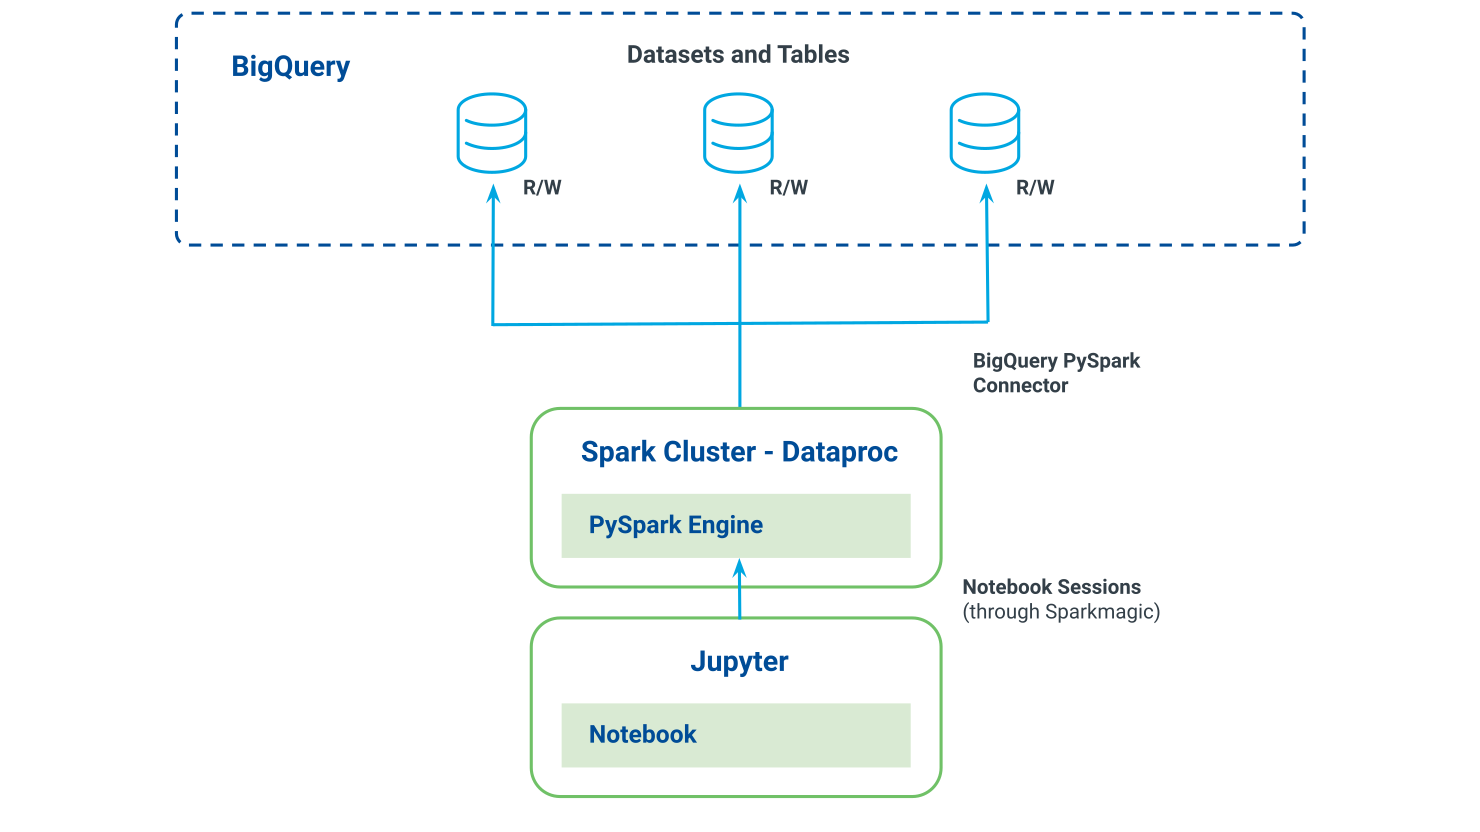 S_LSH-Working_with_Jupyter_and_Pyspark-Overview_diagram.jpg